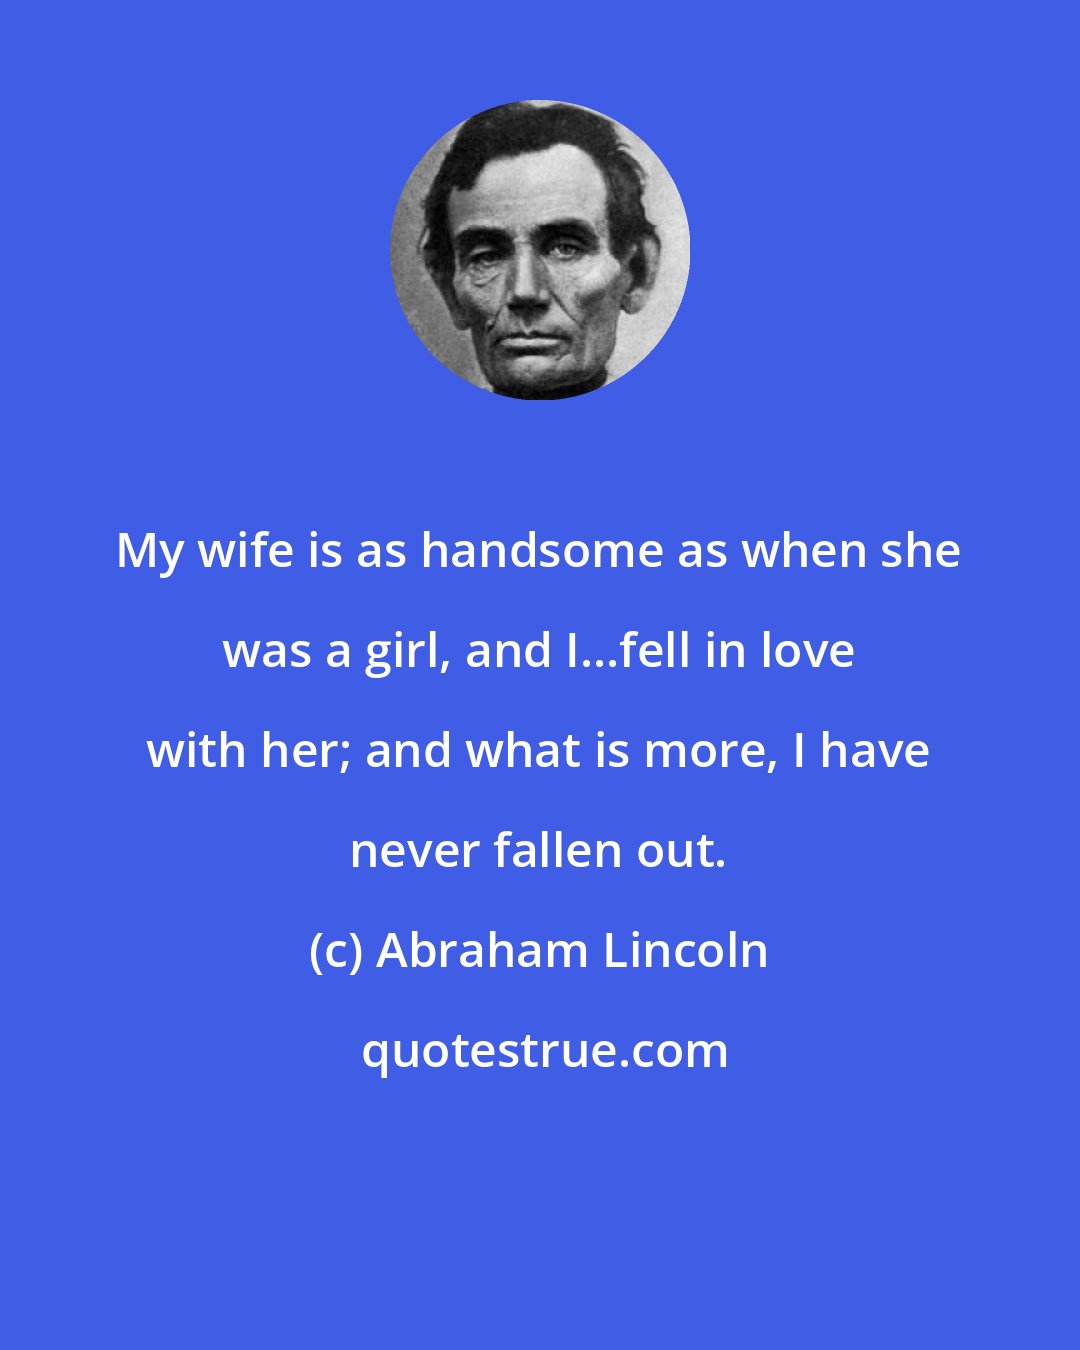 Abraham Lincoln: My wife is as handsome as when she was a girl, and I...fell in love with her; and what is more, I have never fallen out.